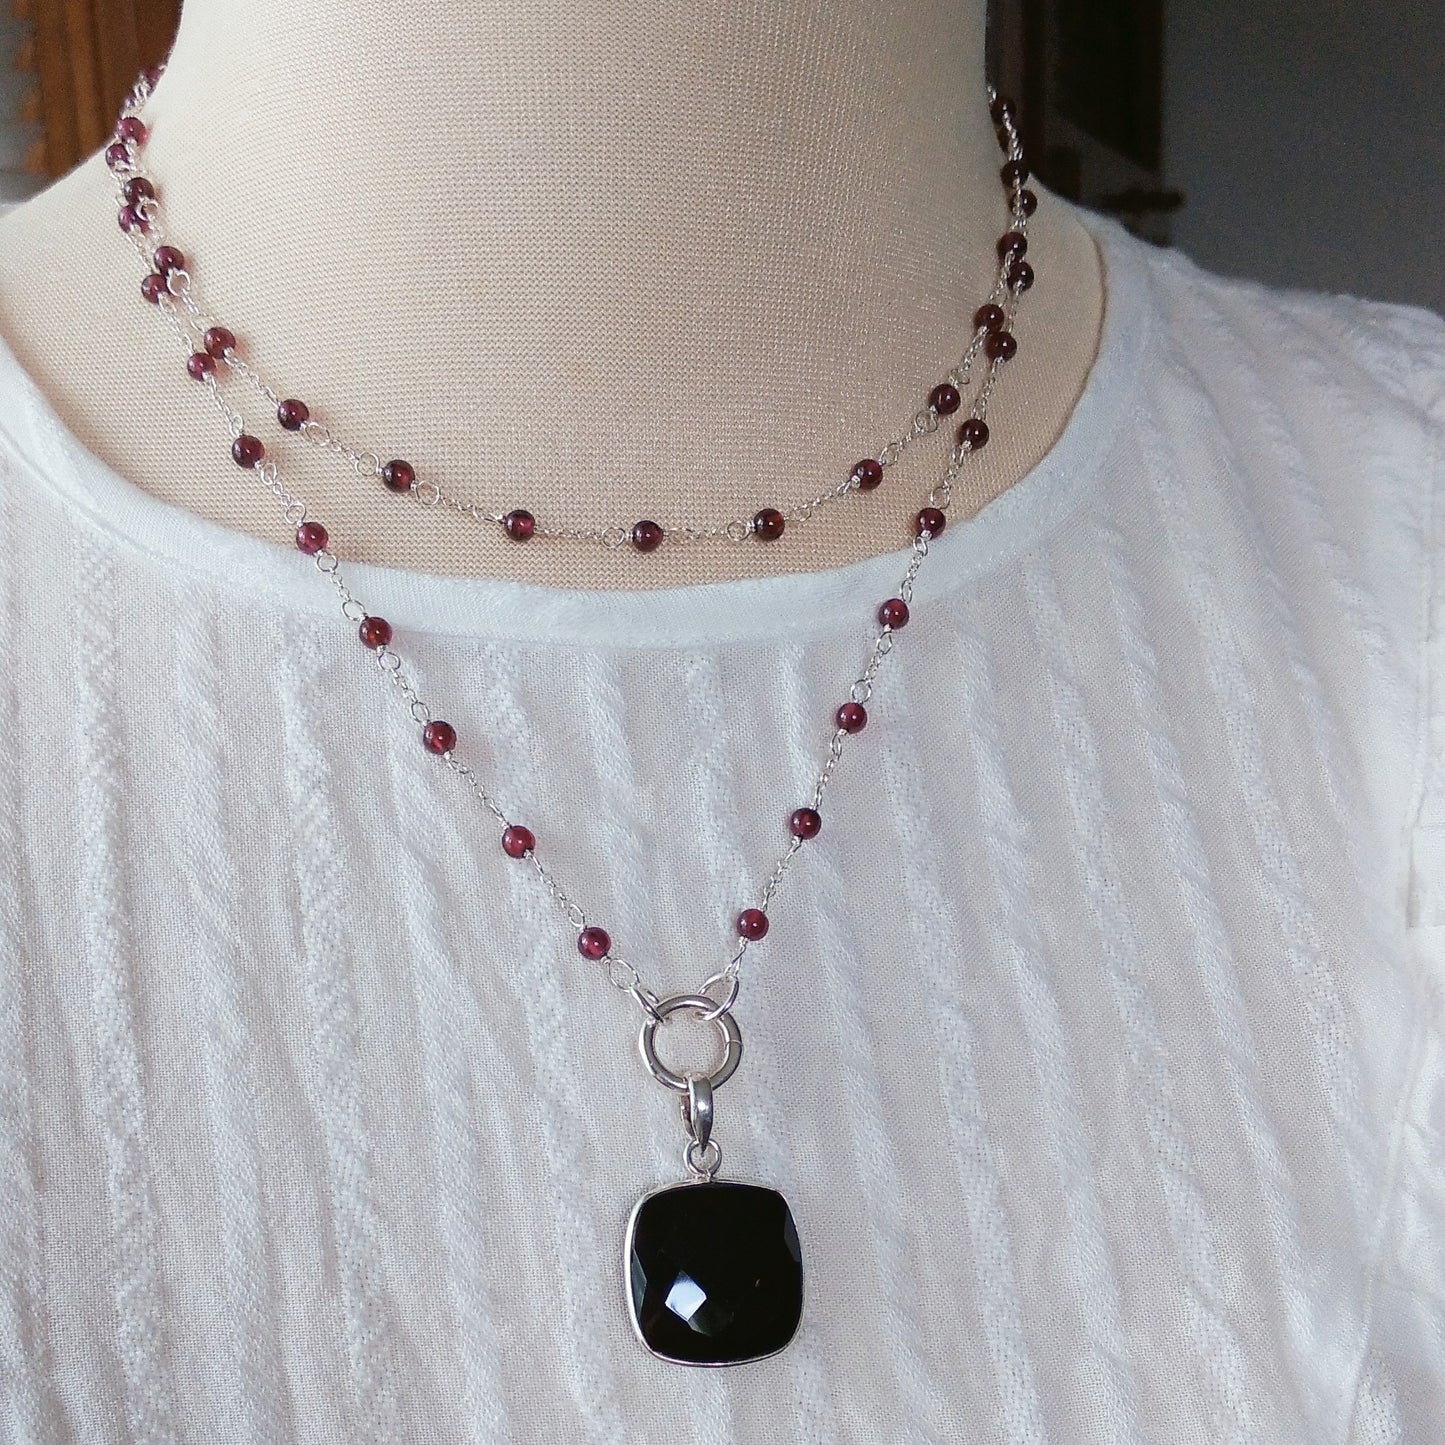 Black Onyx Square Facetted Pendant Charm